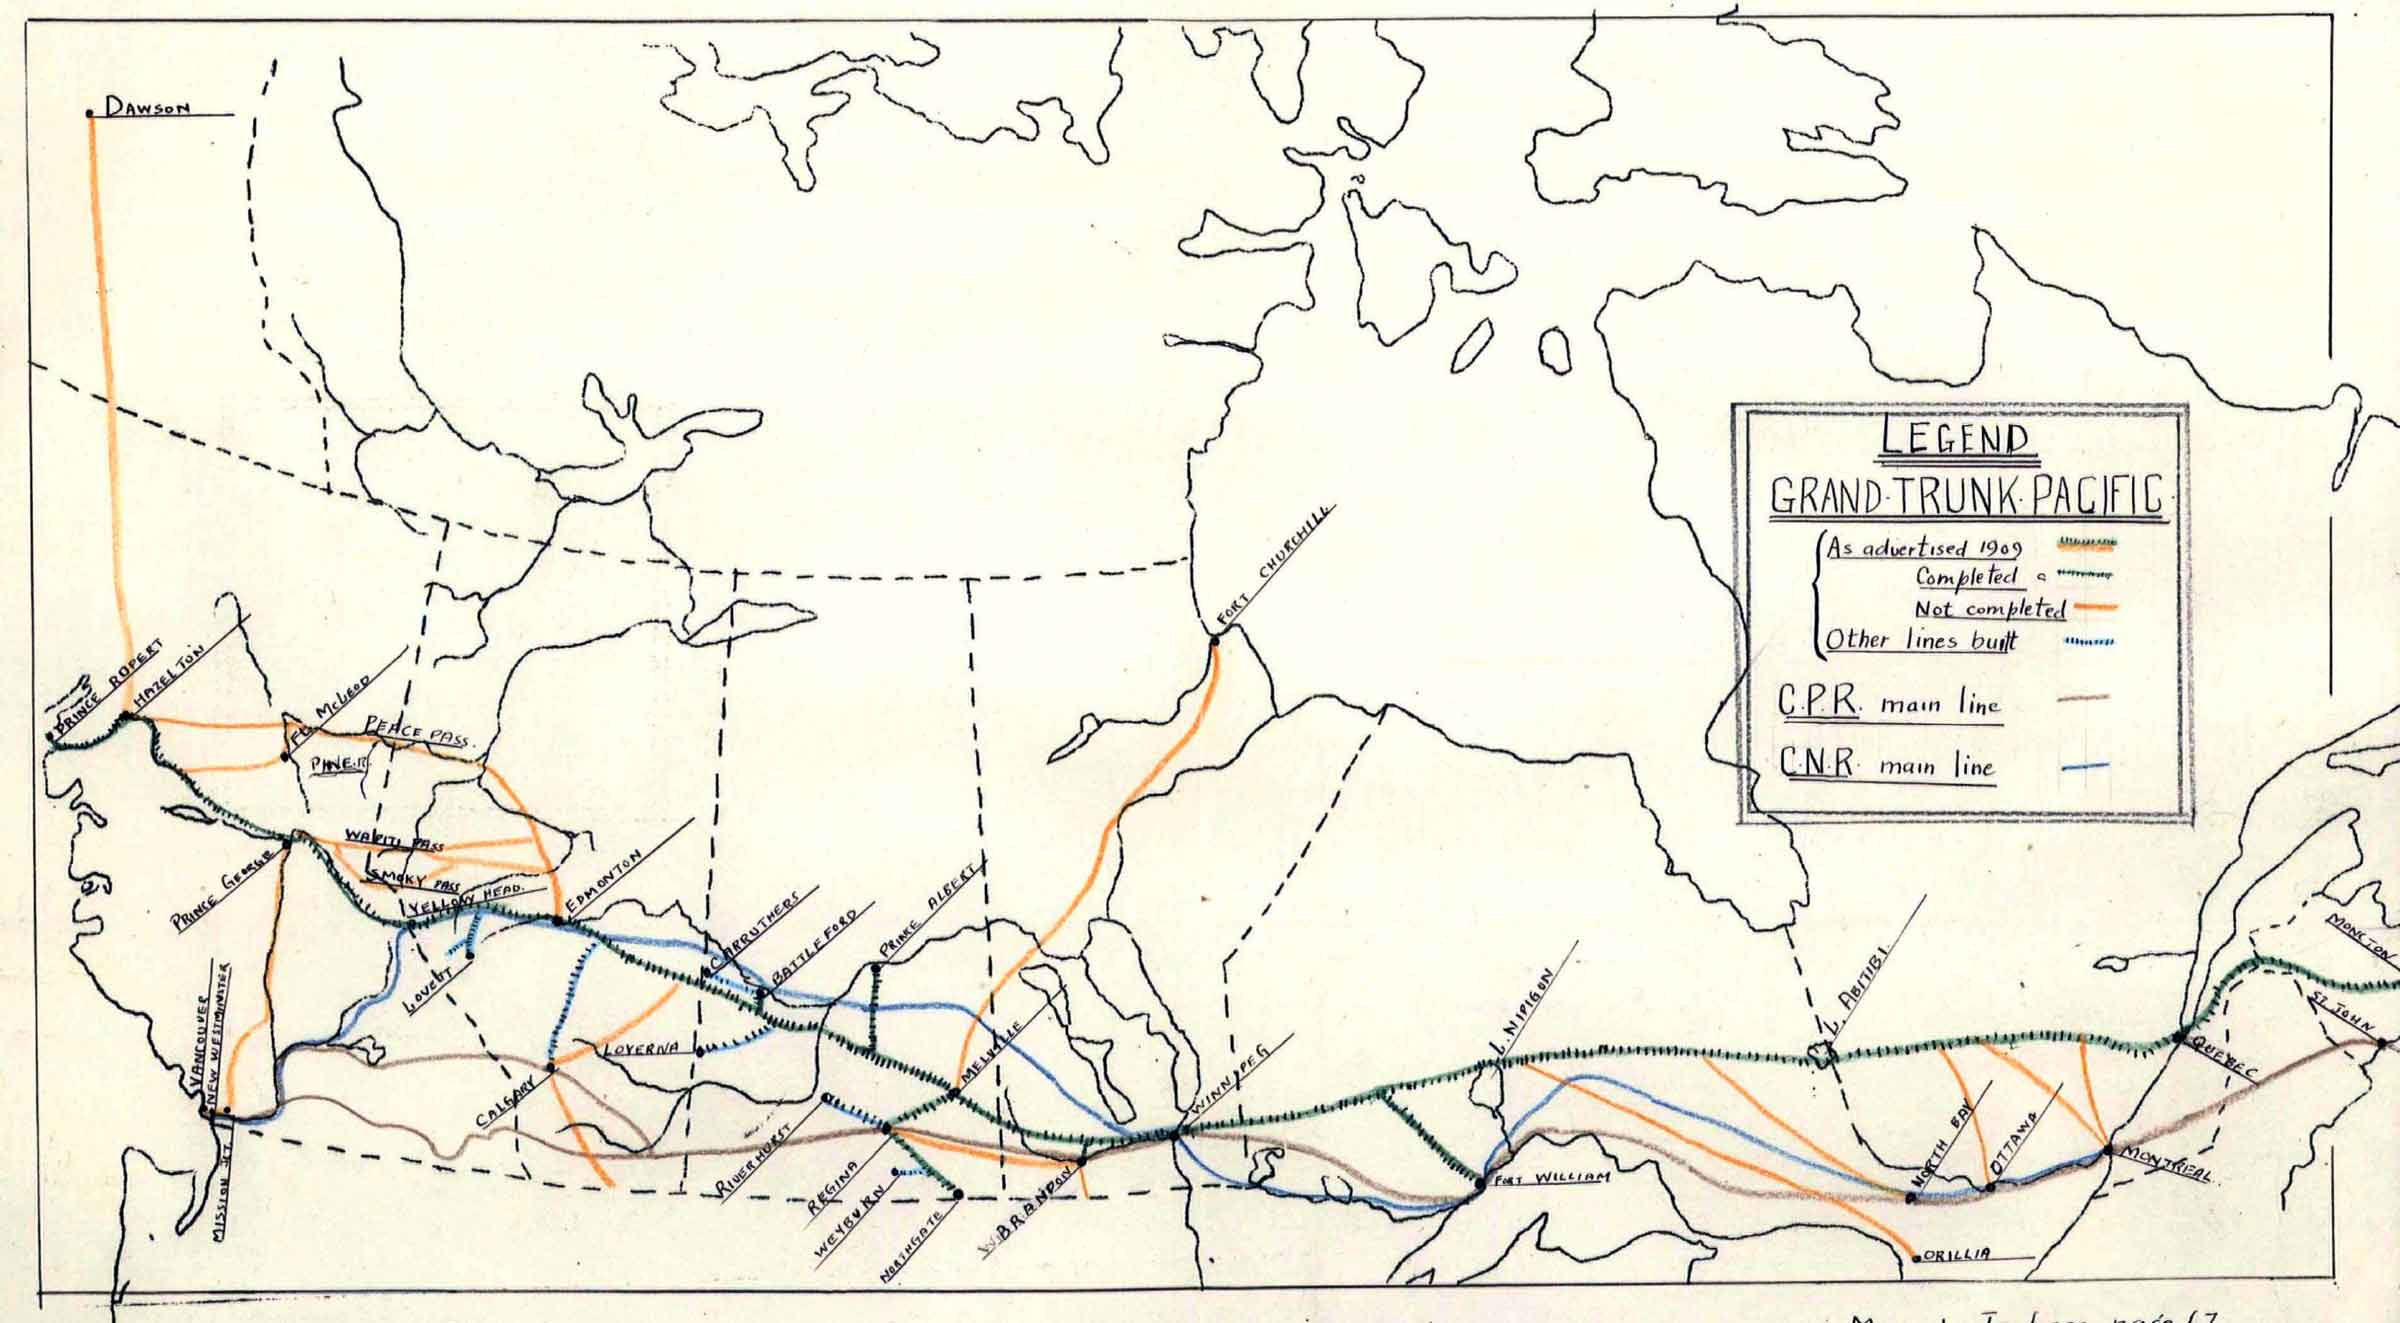 Lower, Joseph Arthur. The Grand Trunk Pacific Railway as projected